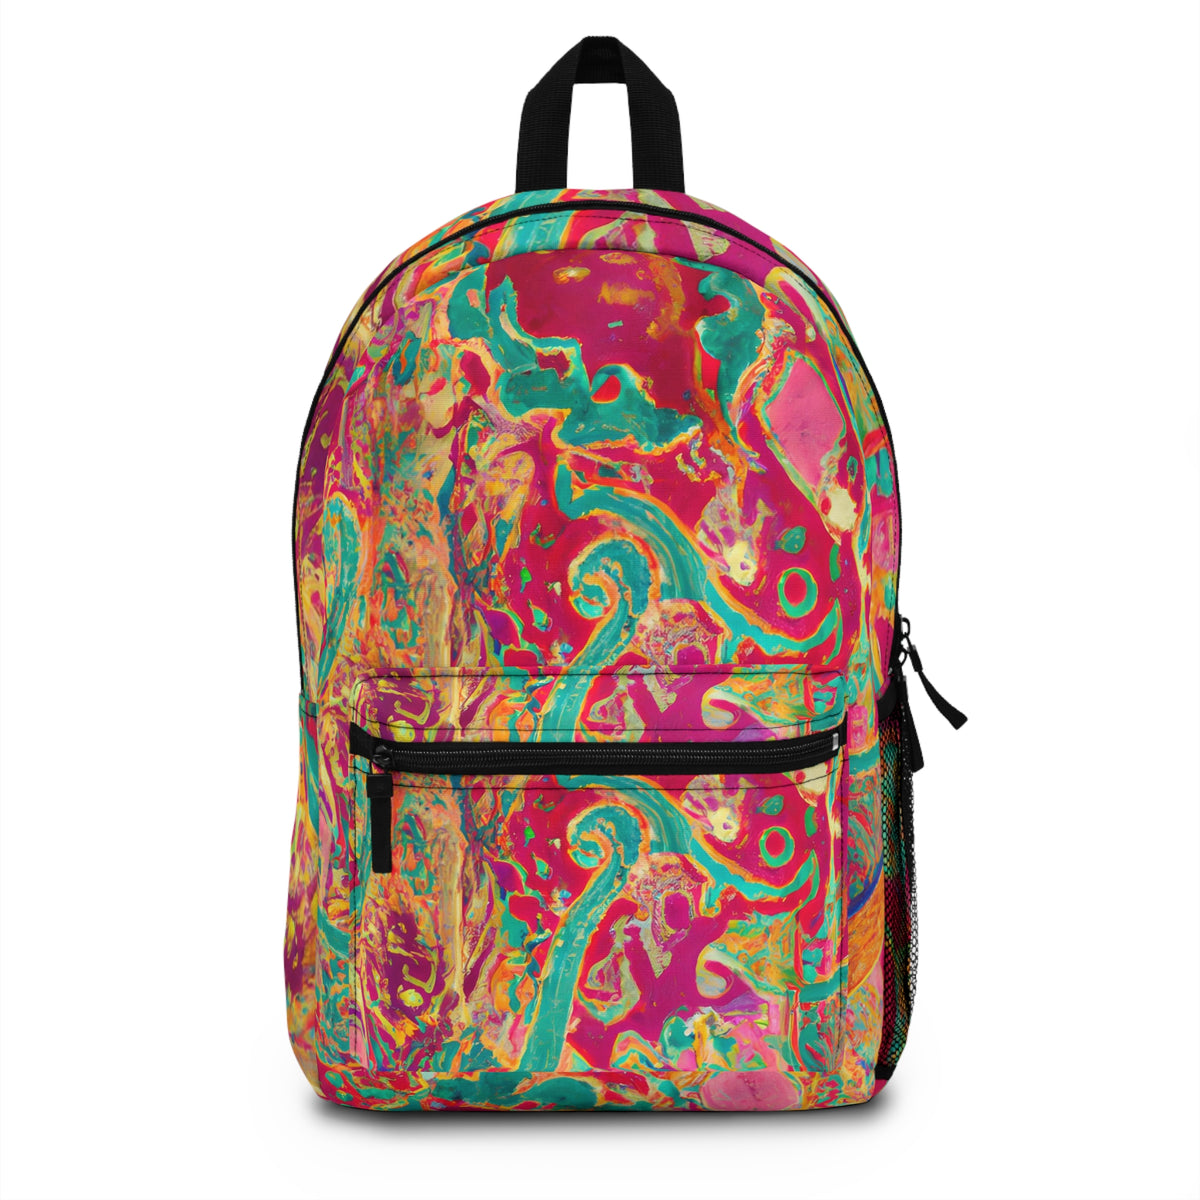 FlapperFrost - Gay-Inspired Backpack